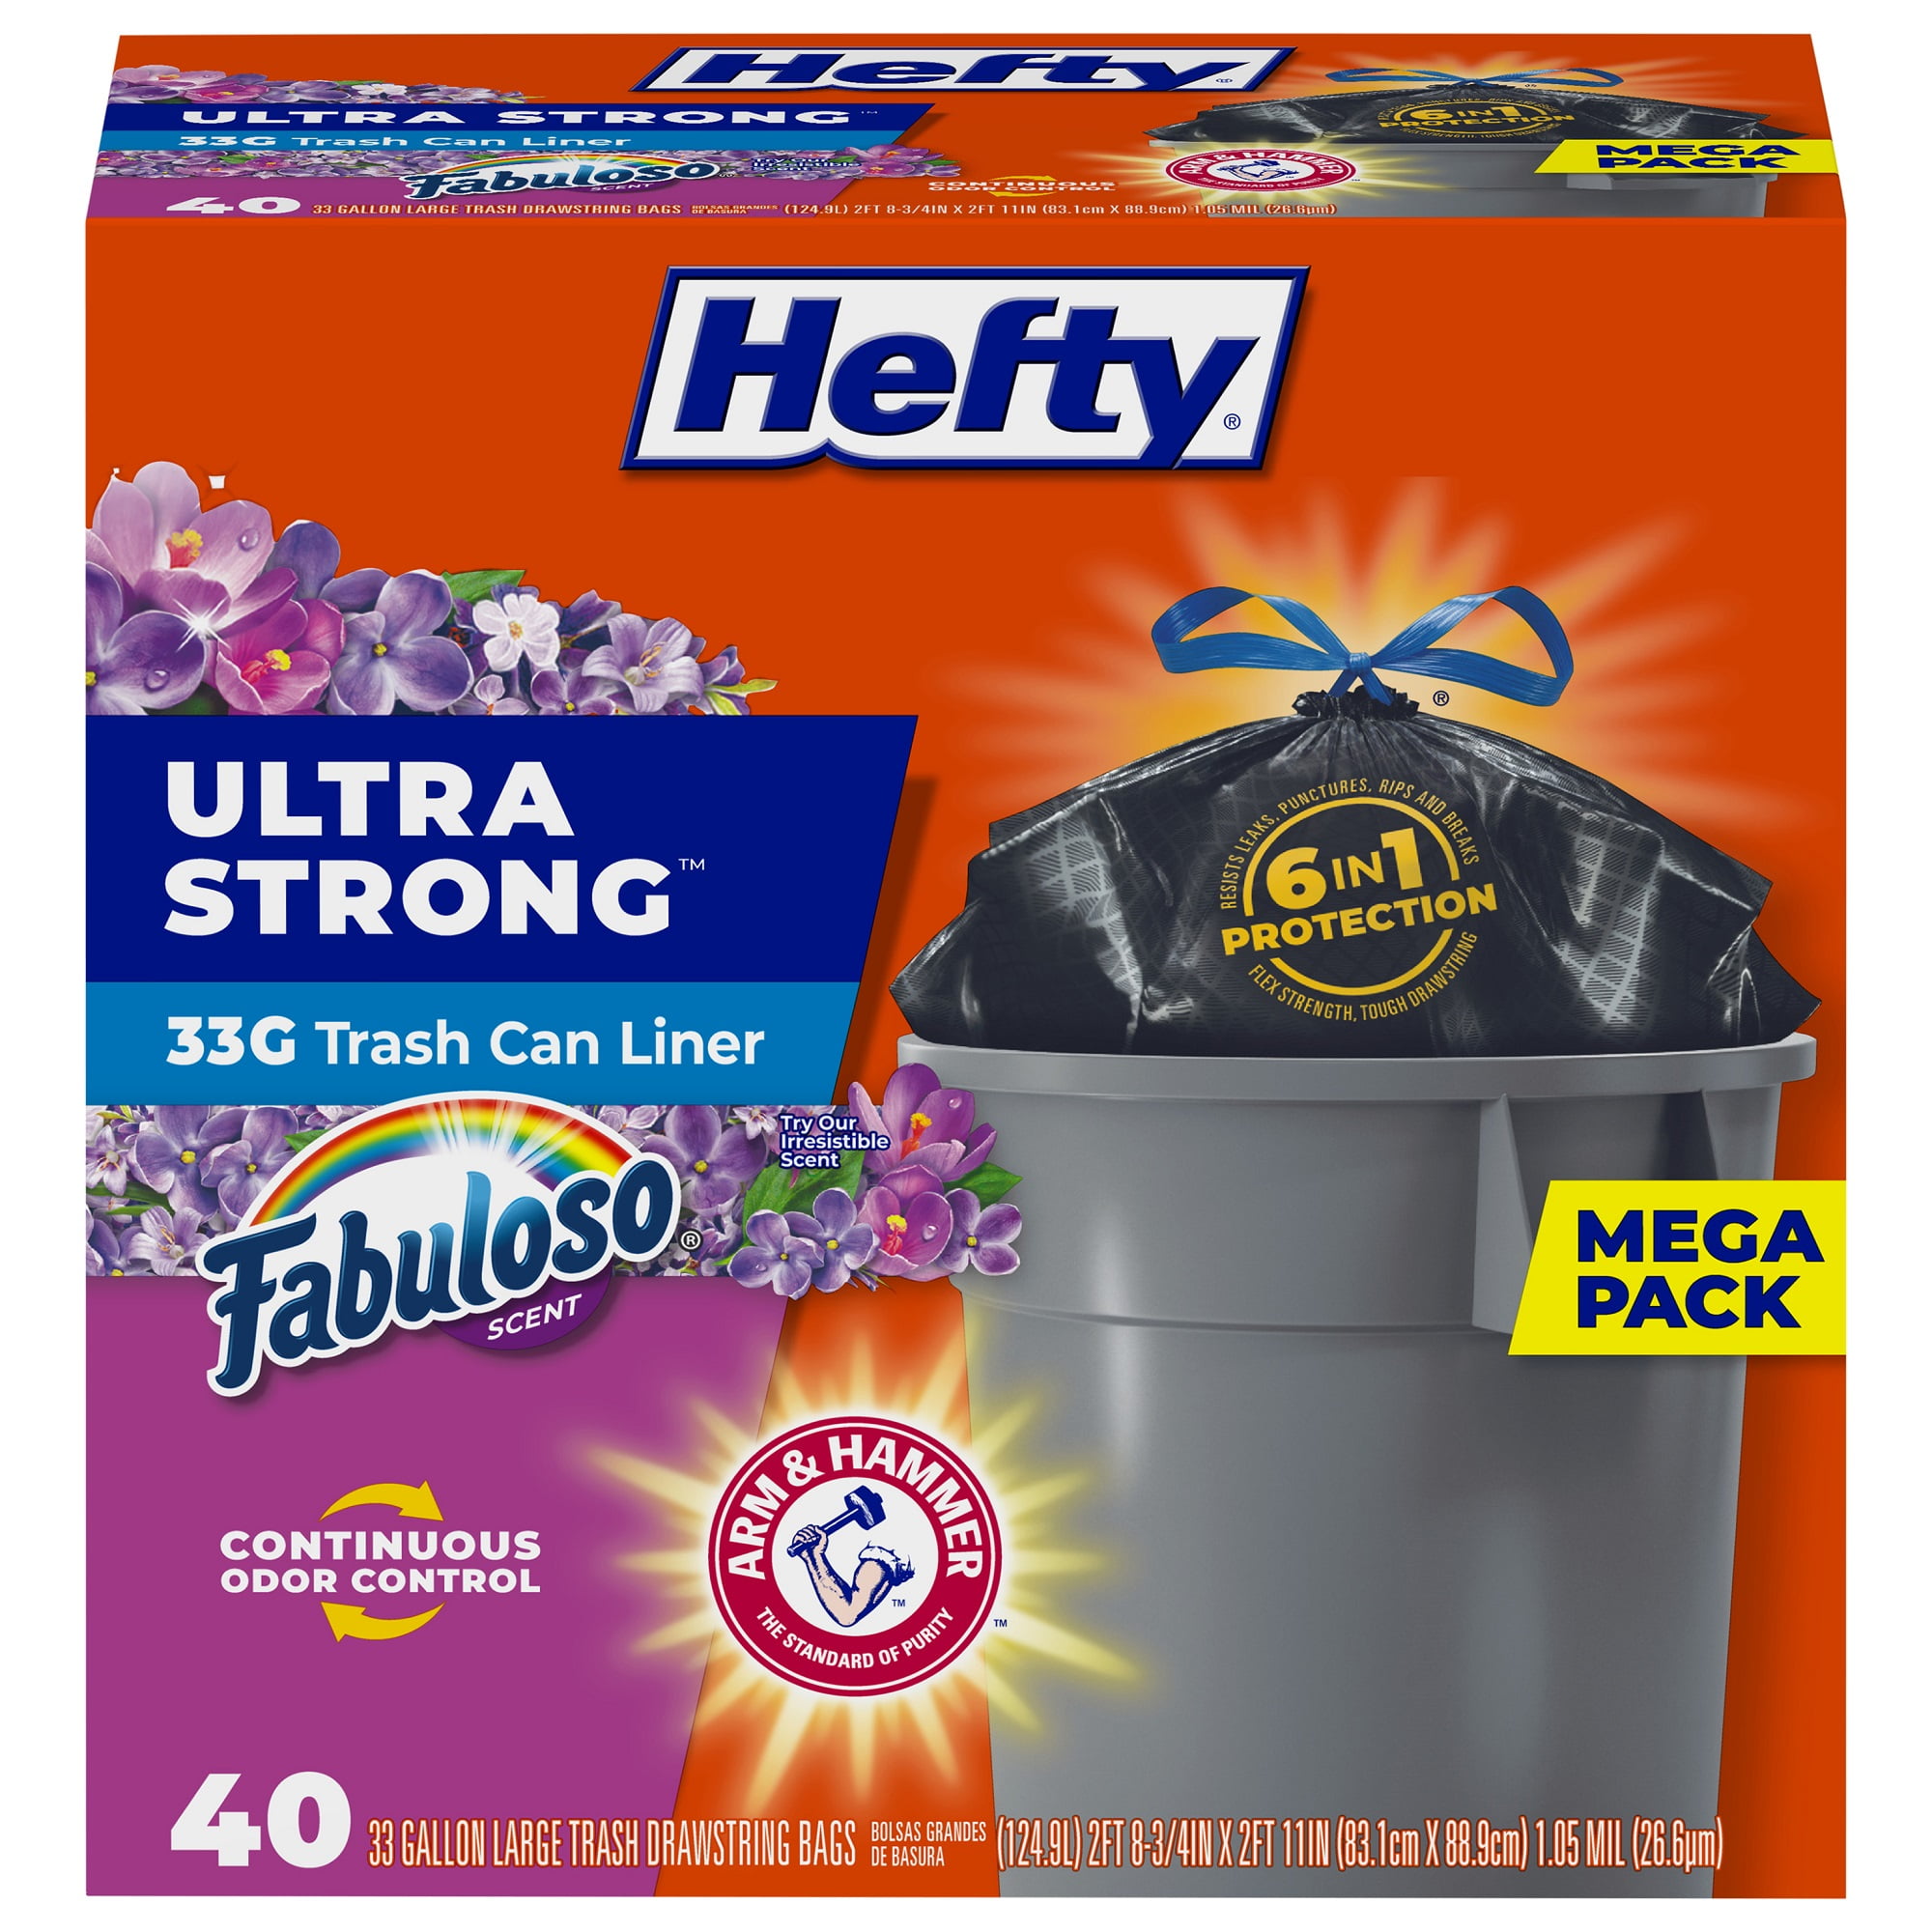 Hefty Ultra Strong Tall Kitchen Trash Bags, Fabuloso Scent, 13 Gallon, 40  Count